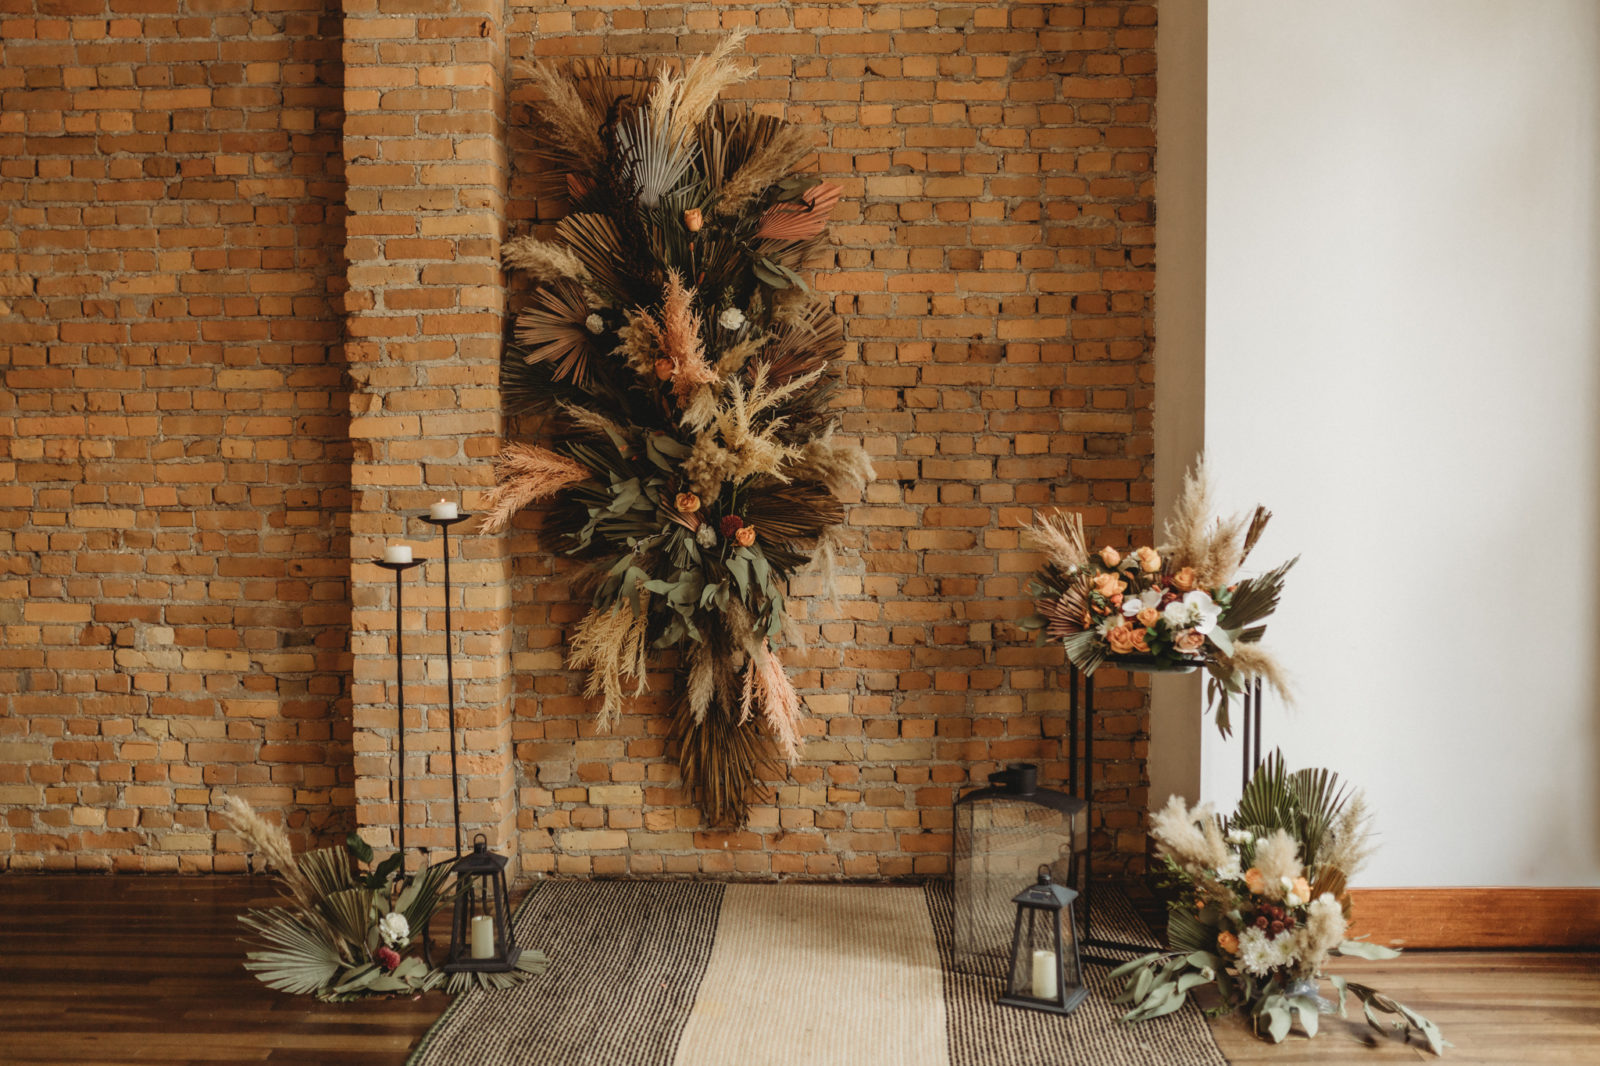 Boho wedding ceremony decor styled by Chemistry Events featuring dried florals and a brick wall at The Garret